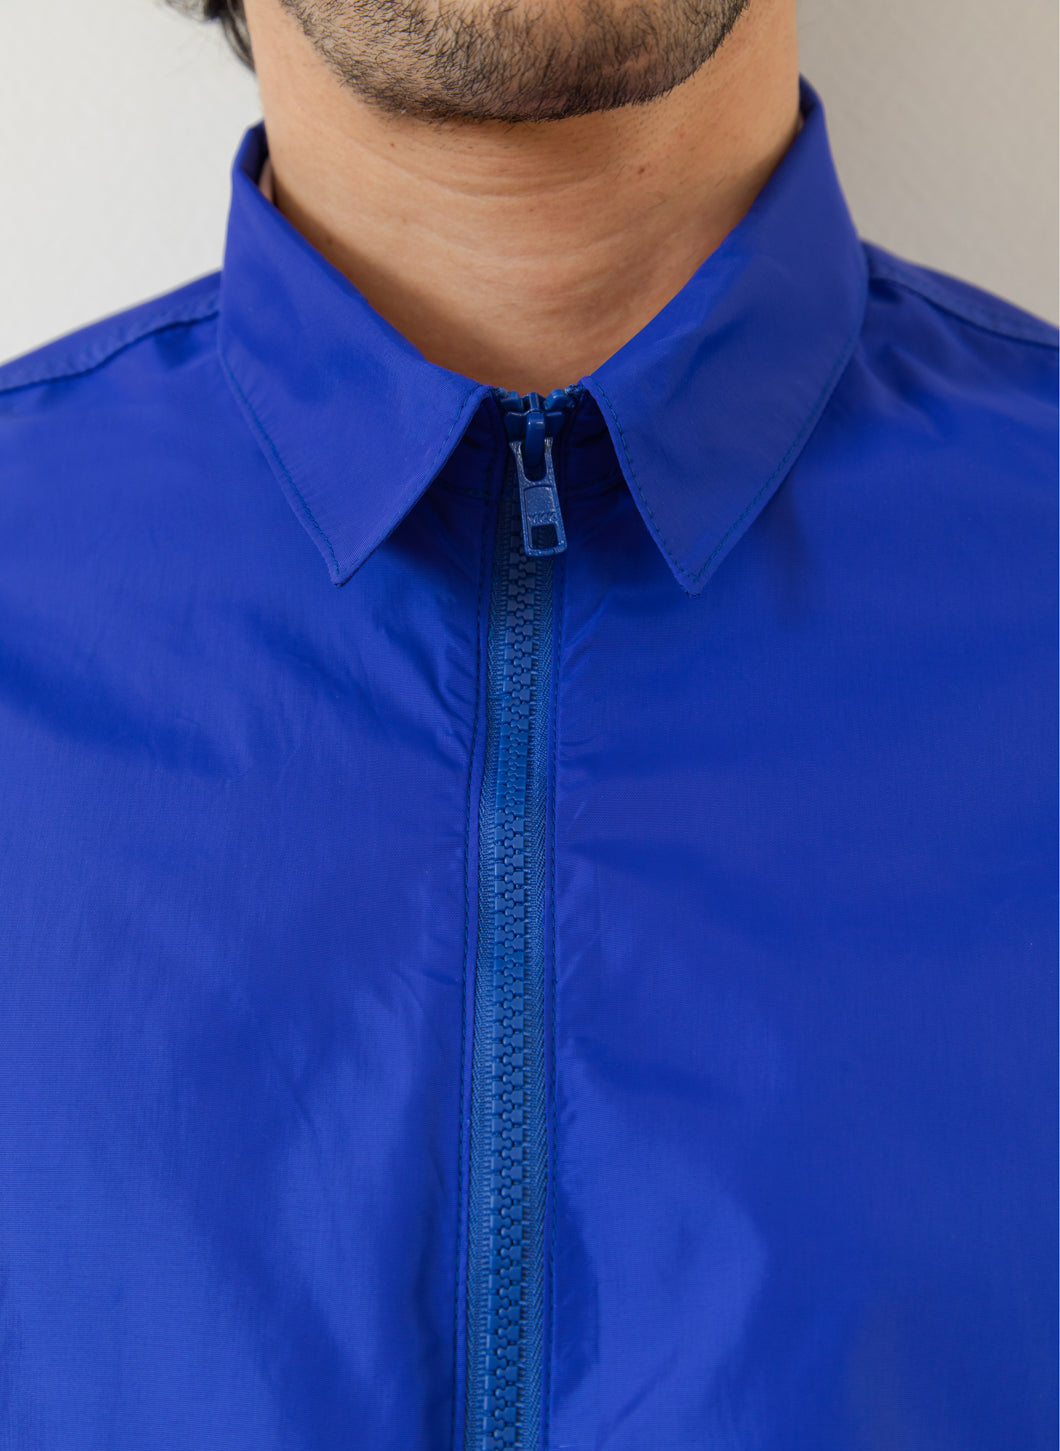 Windproof Overshirt in Electric Blue Nylon